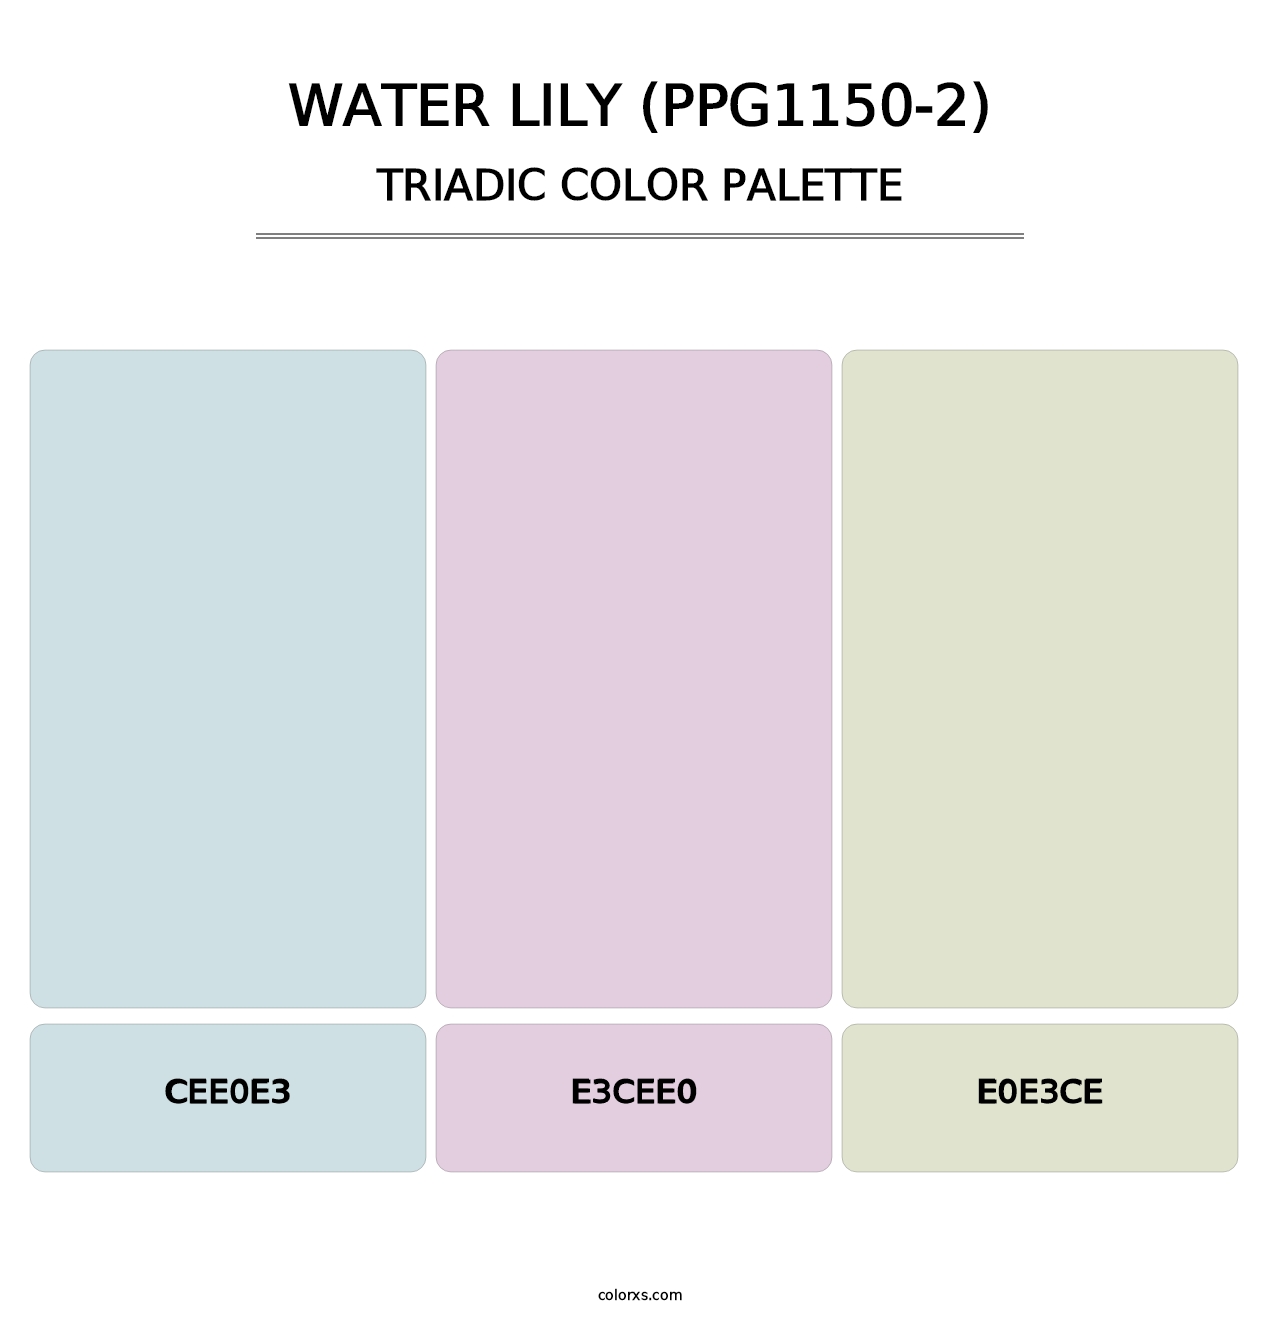 Water Lily (PPG1150-2) - Triadic Color Palette